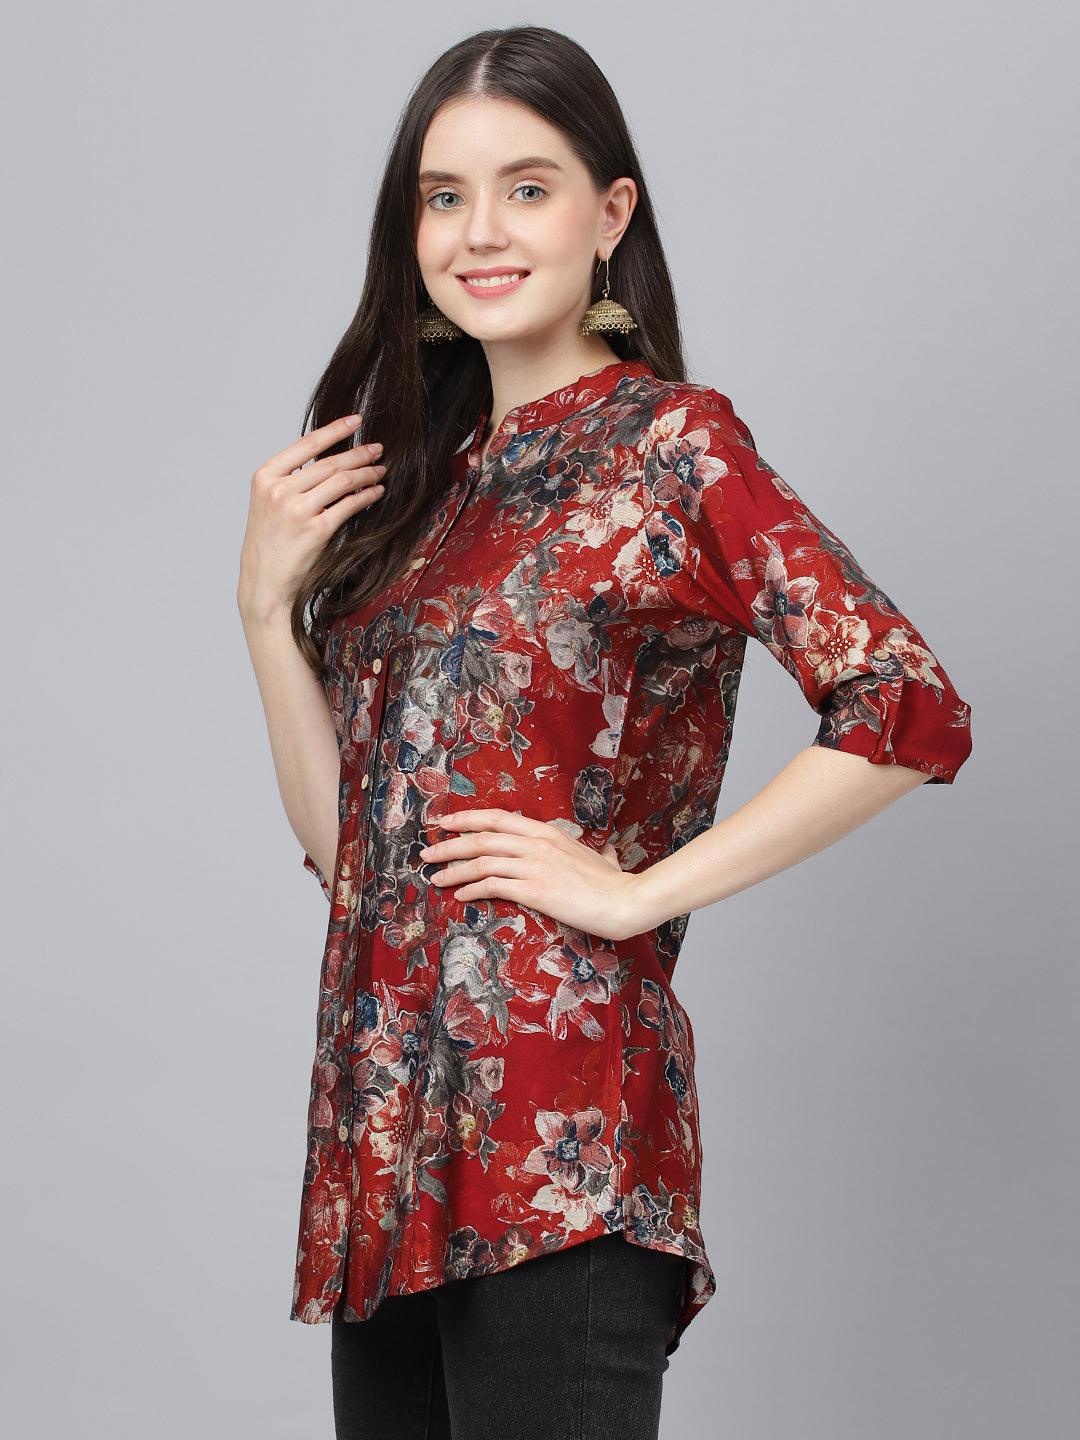 Divena Maroon Floral Printed Modal A-Line Shirts Style Top - divena world